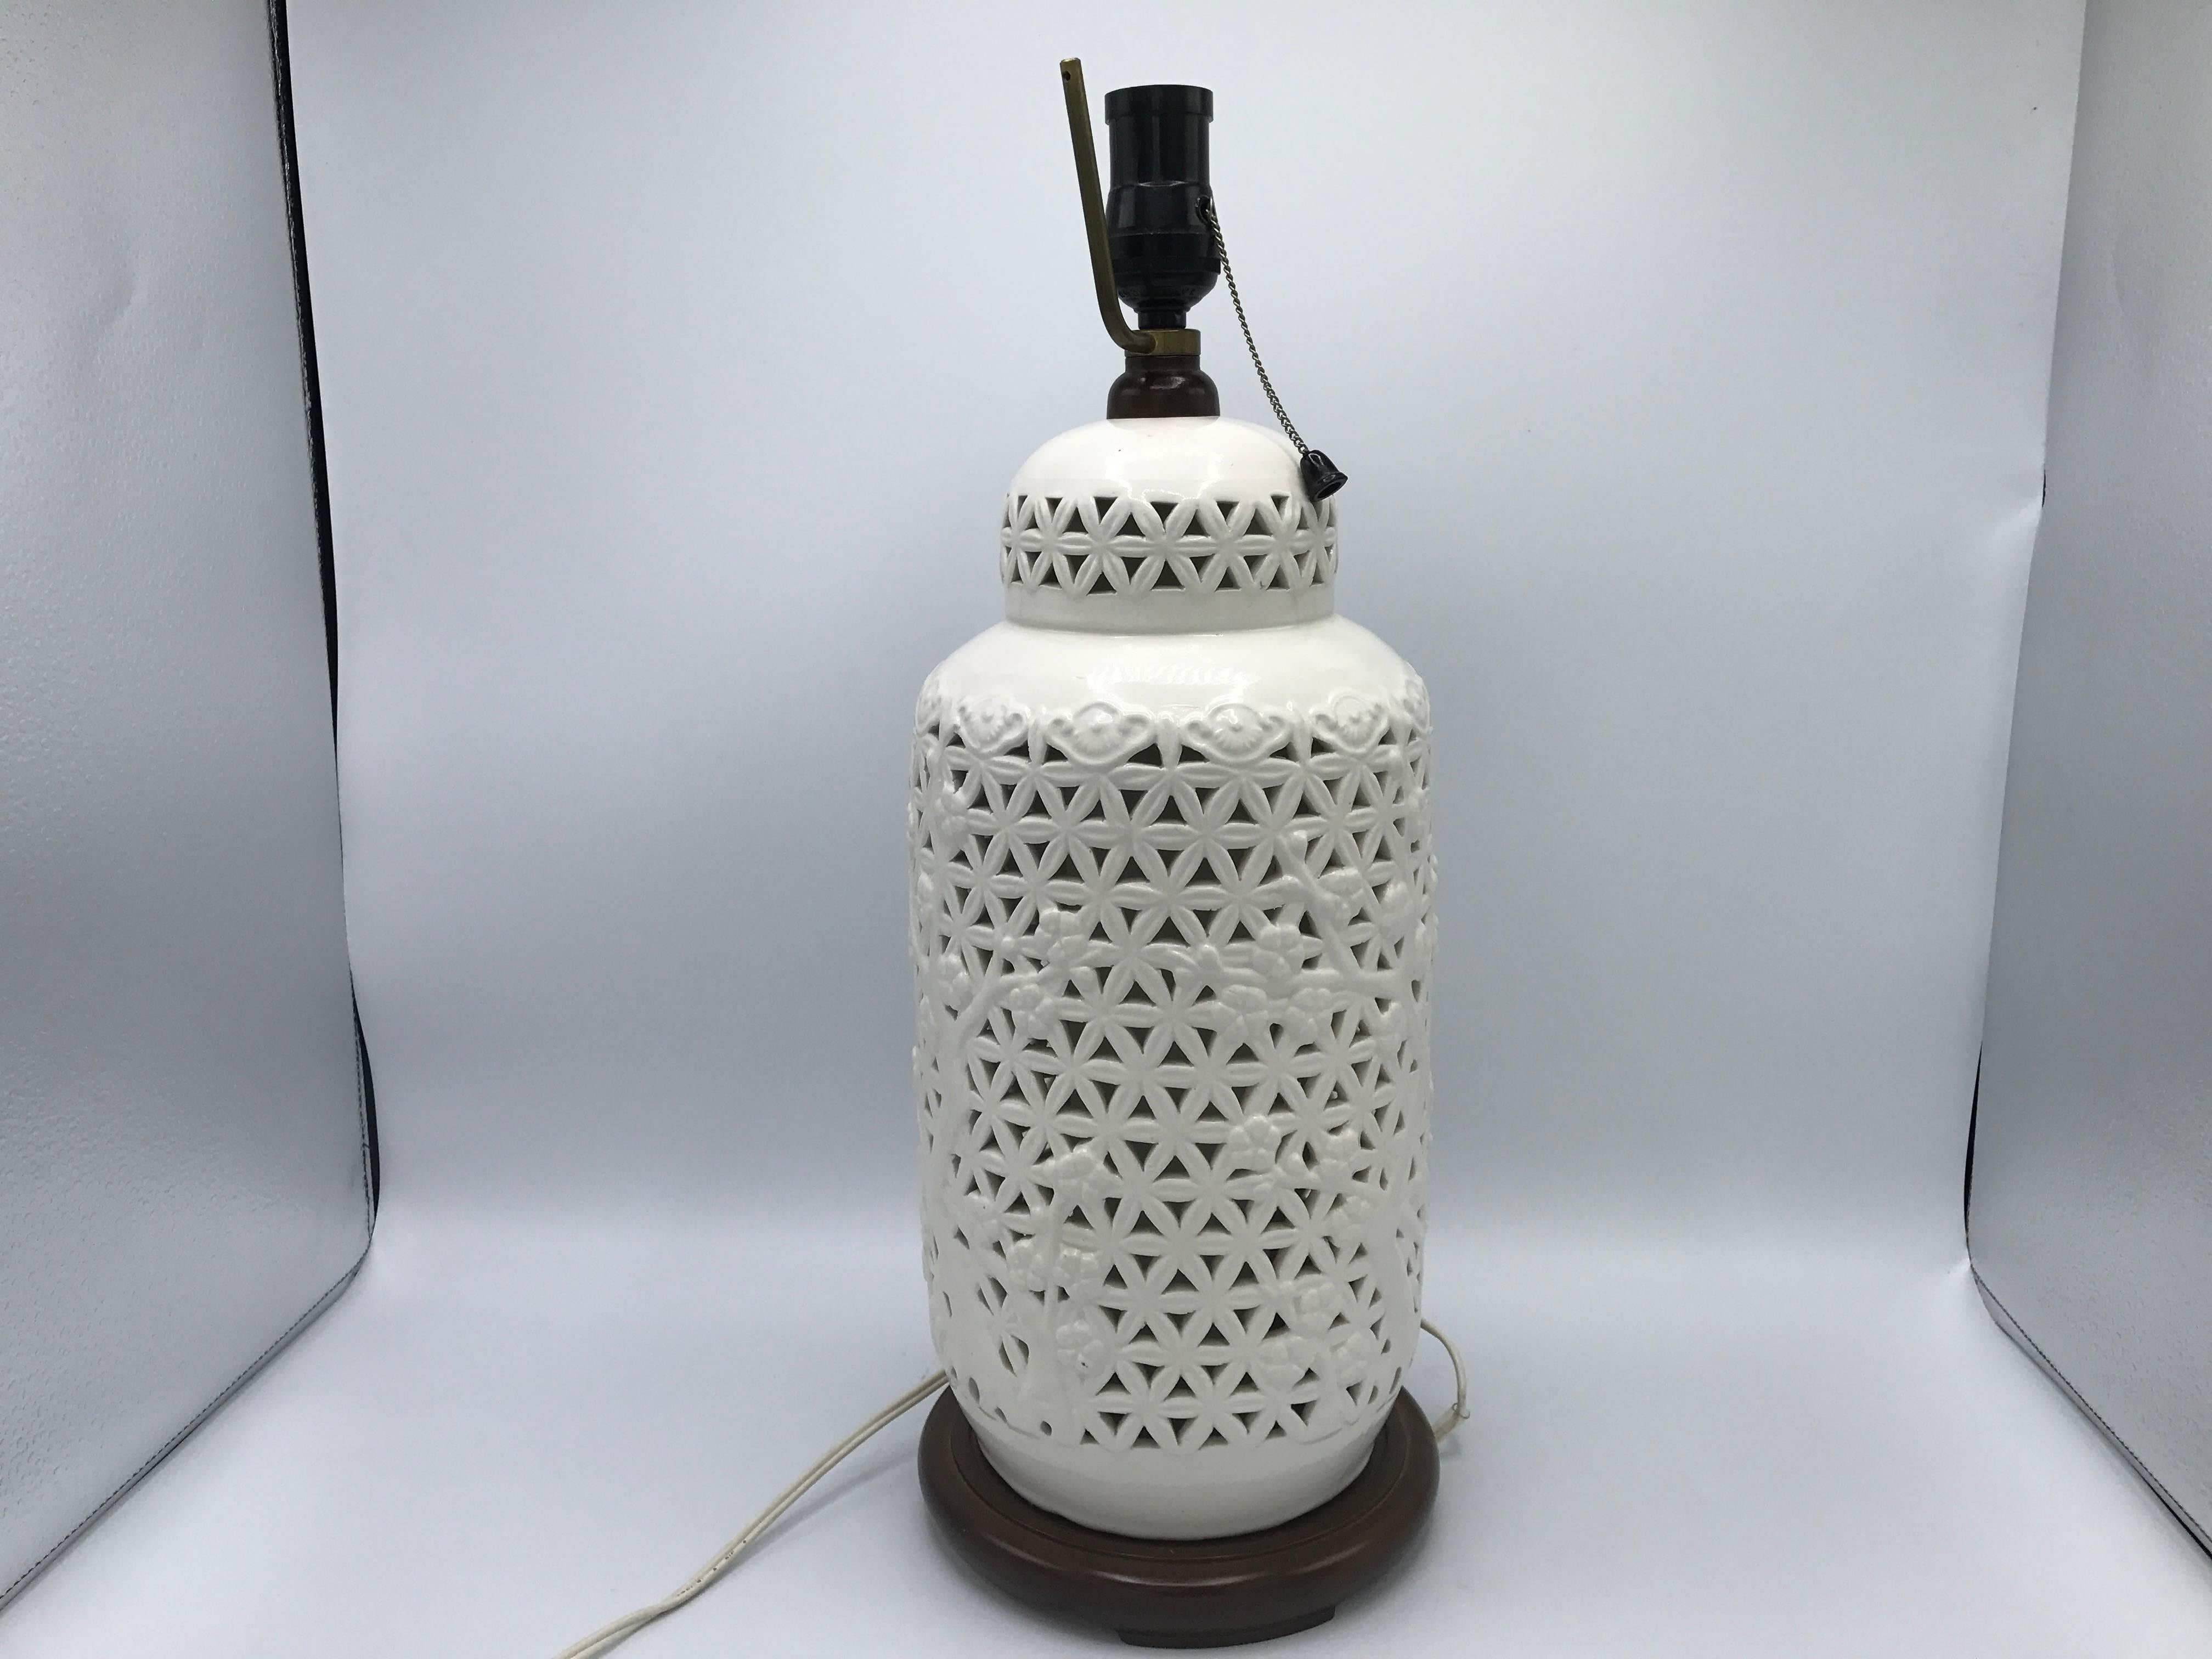 20th Century 1960s Blanc de Chine Lamp with Pierced Cherry Blossom Motif For Sale